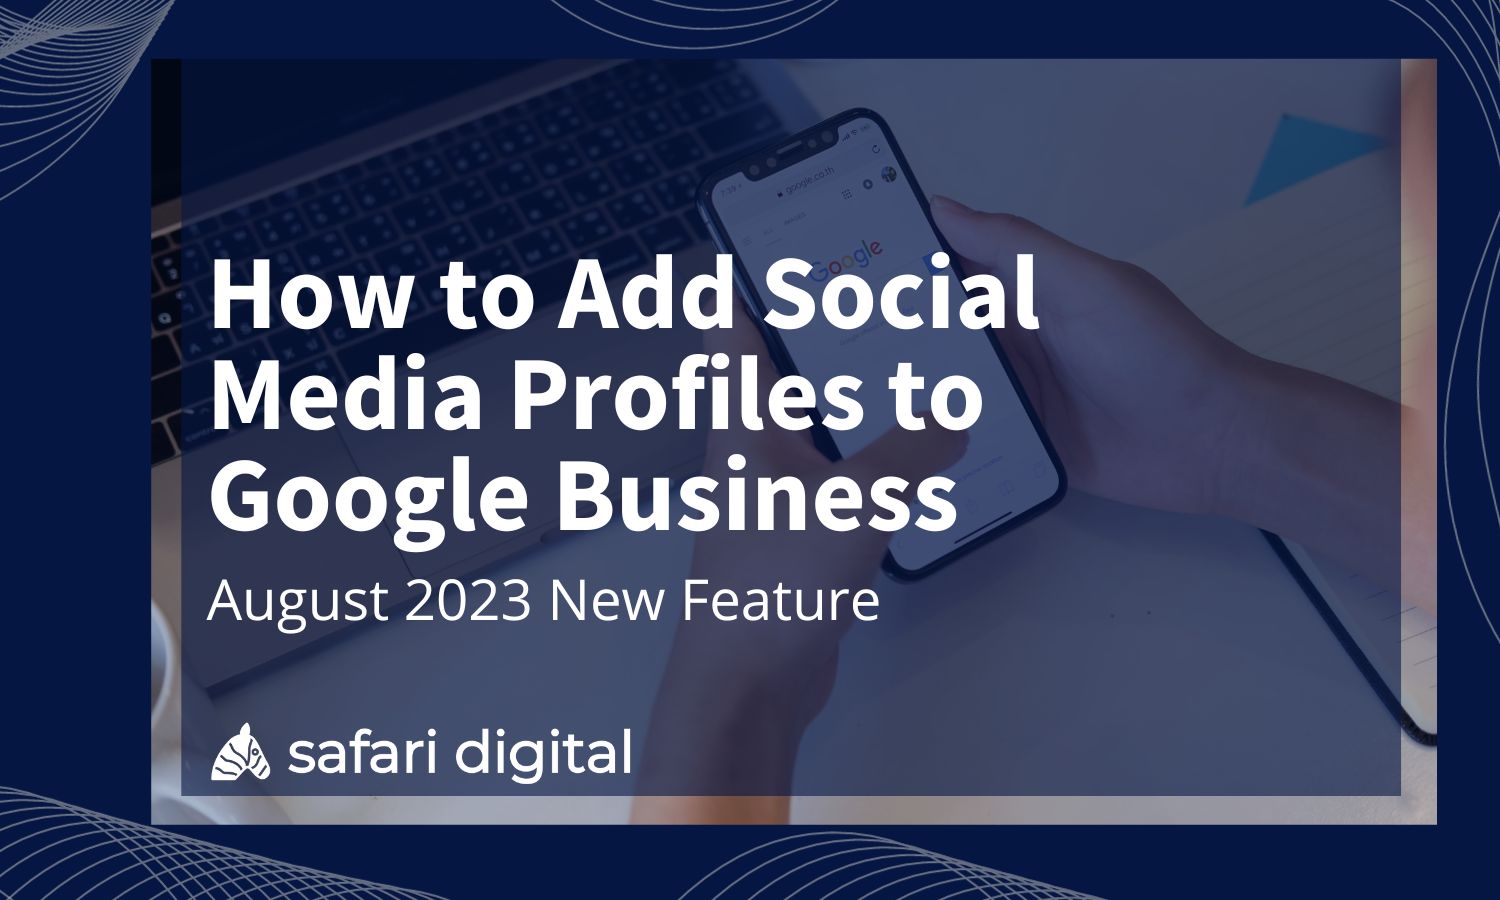 How to Add Social Media Profiles to Google Business (2023 Update)